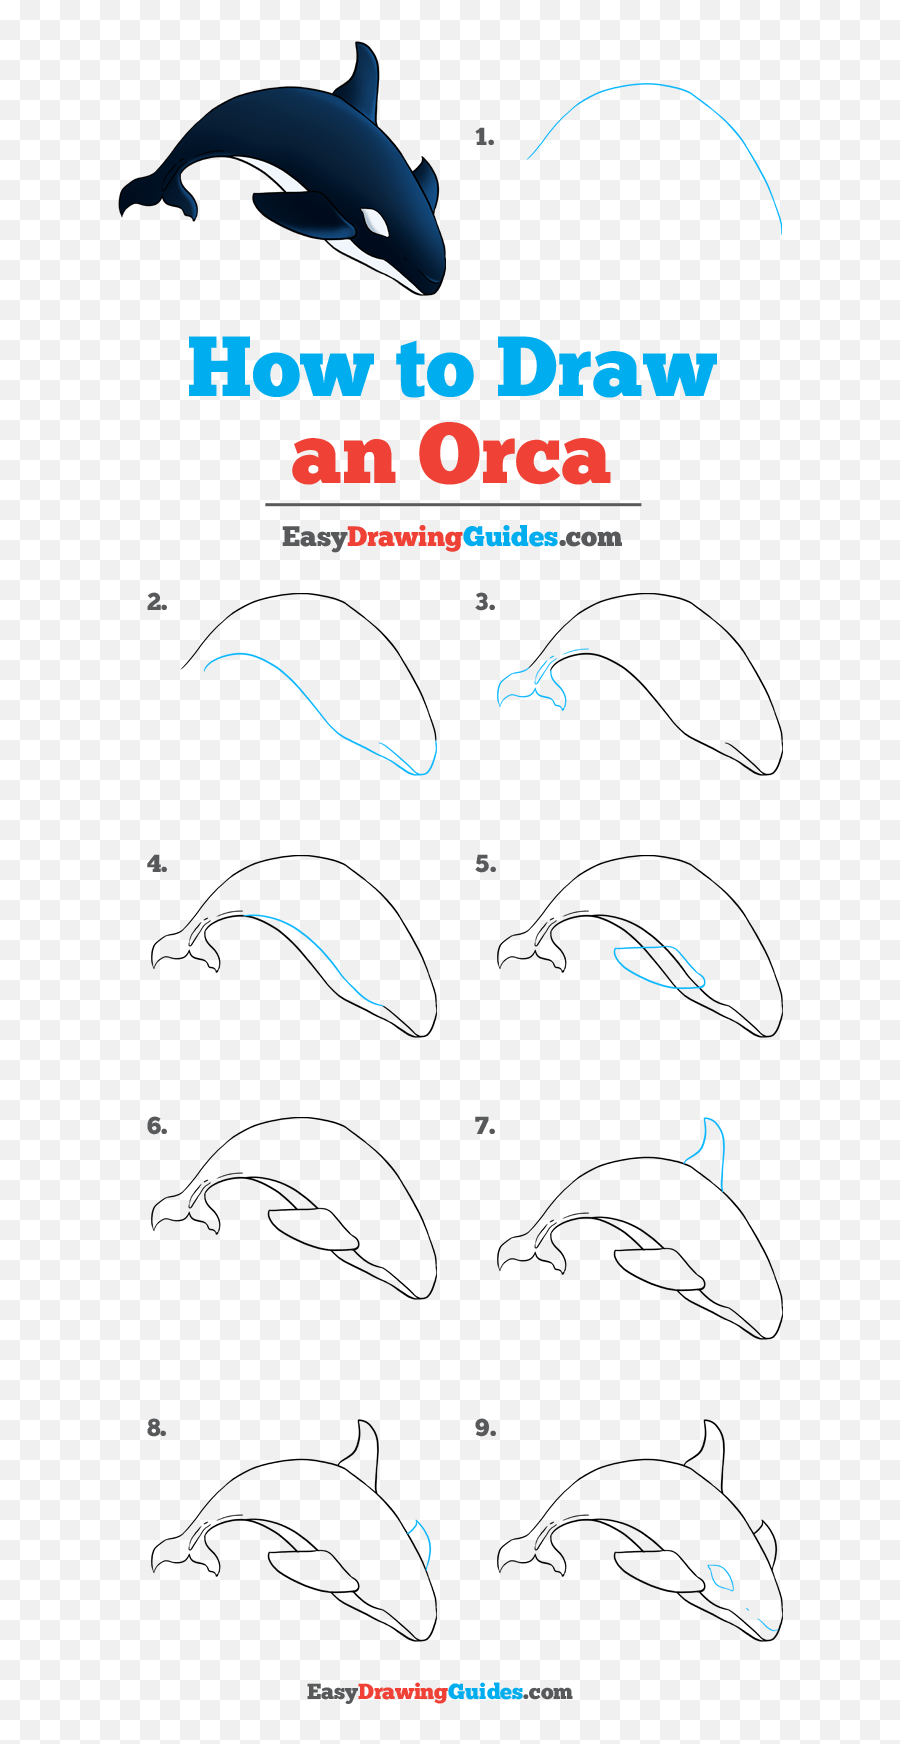 How To Draw An Orca - Really Easy Drawing Tutorial Common Bottlenose Dolphin Emoji,Orcas Brain Emotions